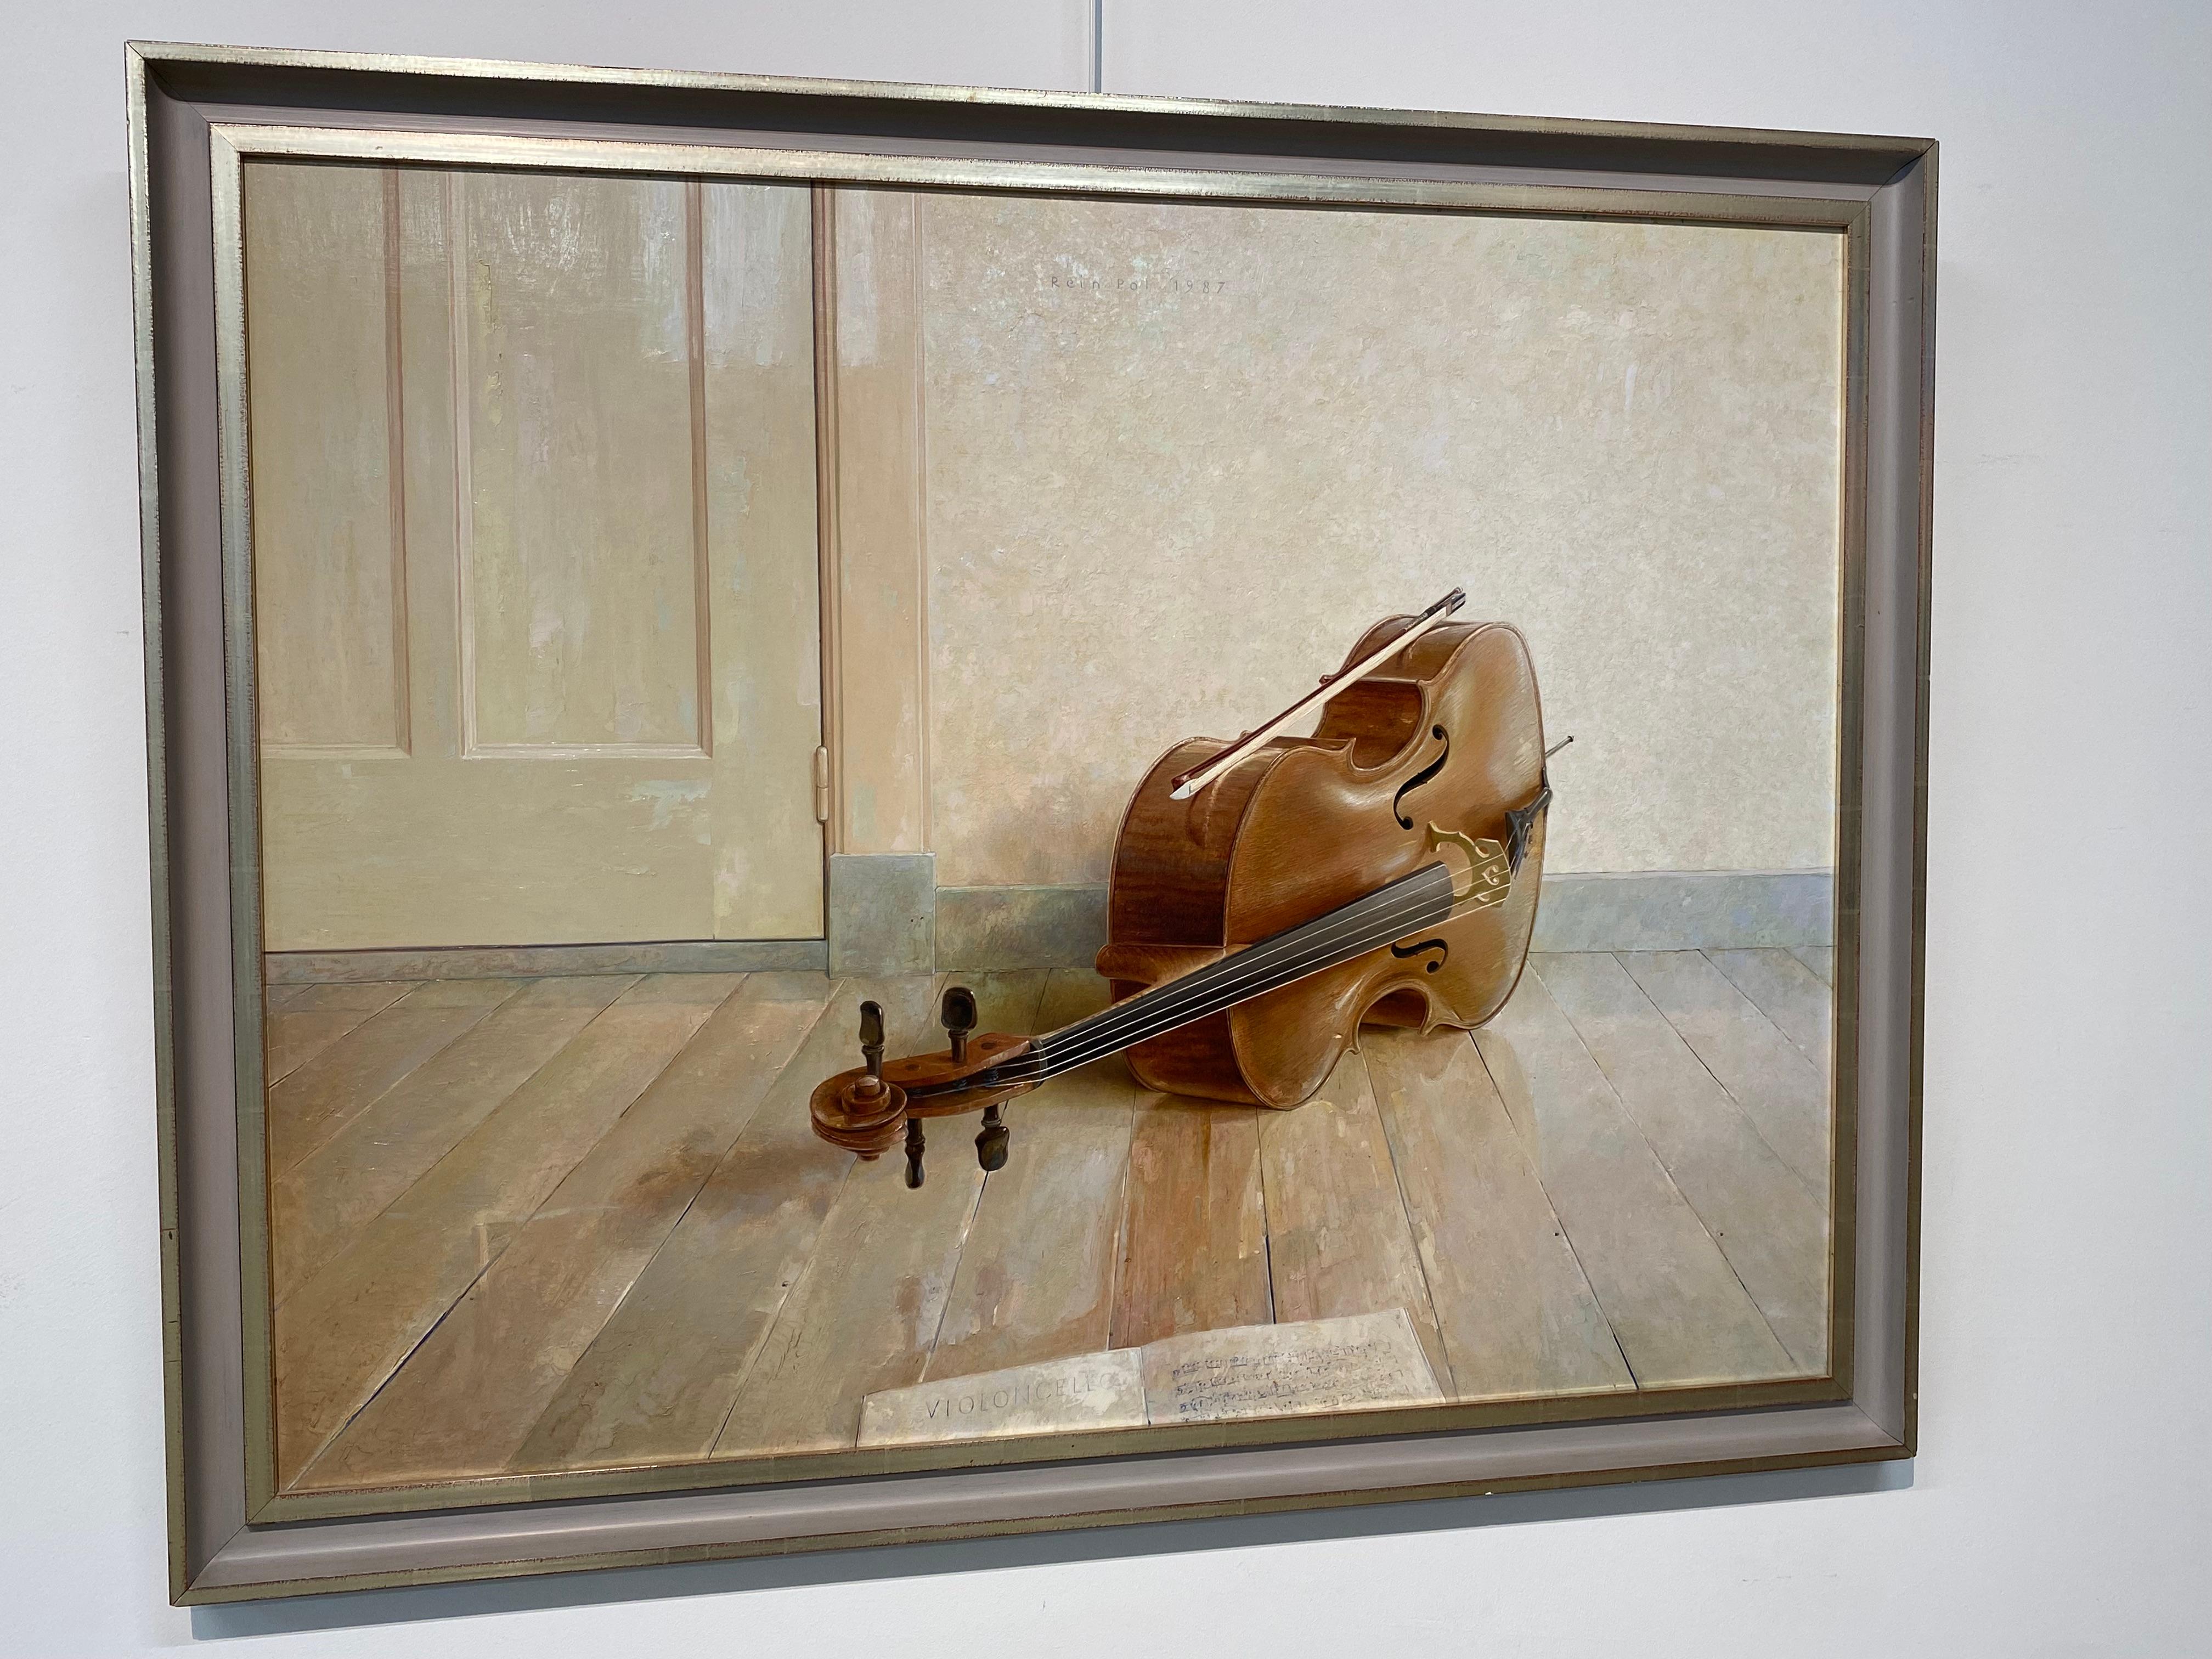 Cello- 21st Century Contemporary Dutch Stille Painting of a Music Instrument  - Brown Still-Life Painting by Rein Pol